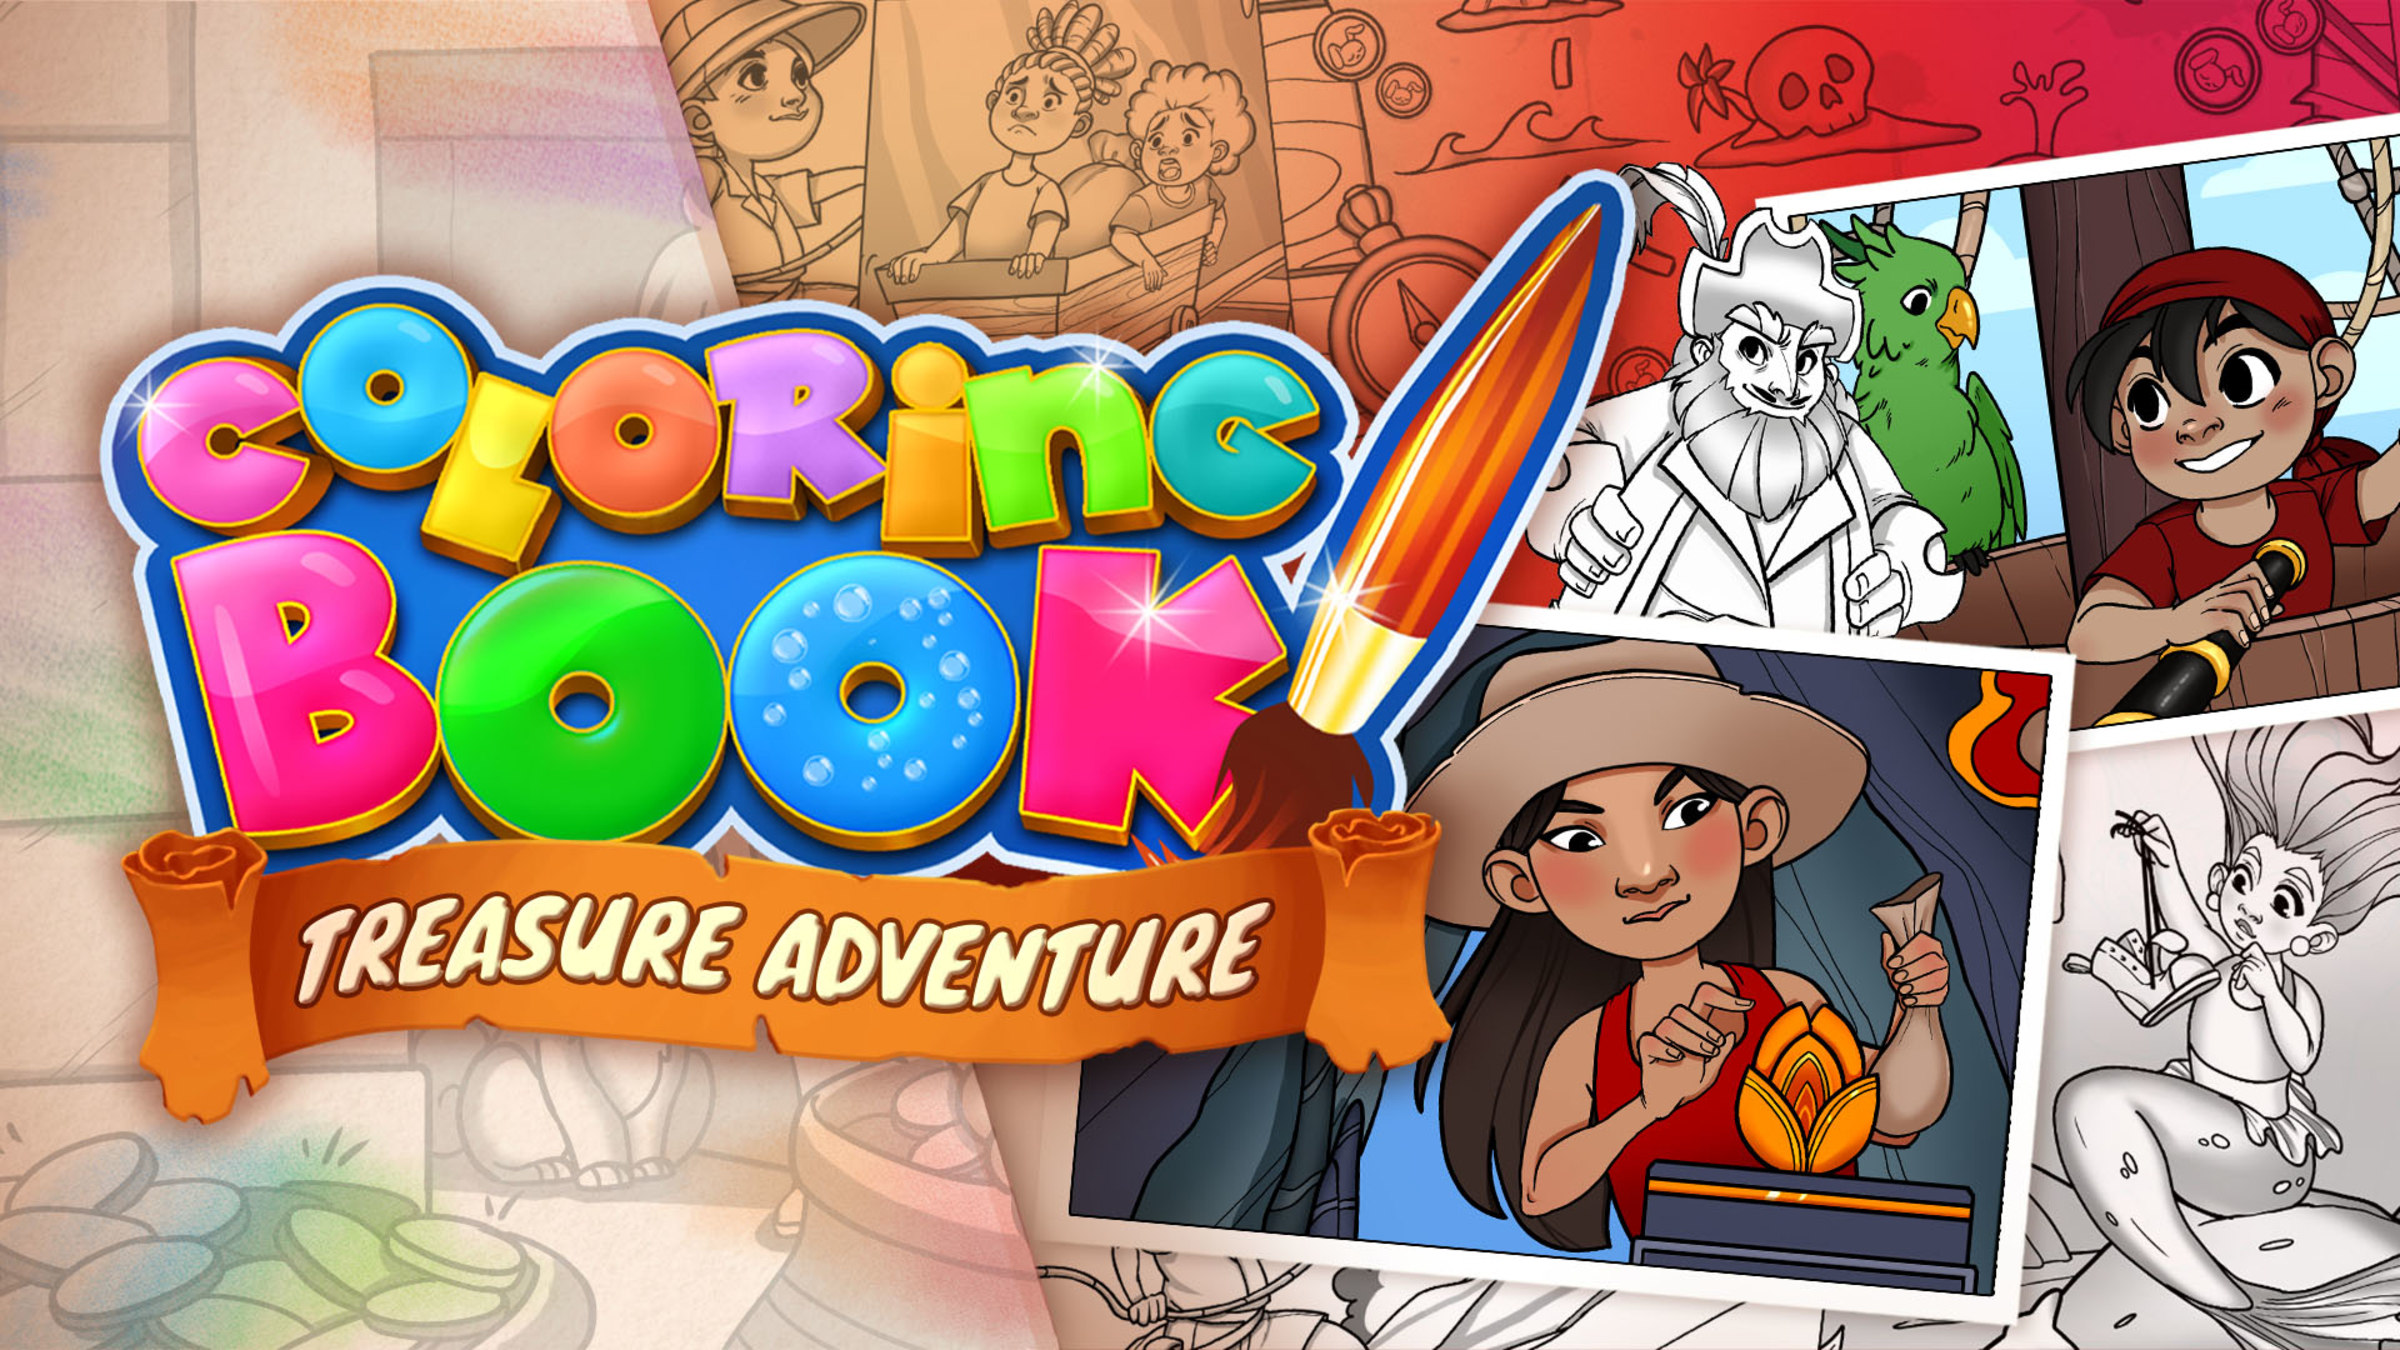 Coloring Book for Adults for Nintendo Switch - Nintendo Official Site